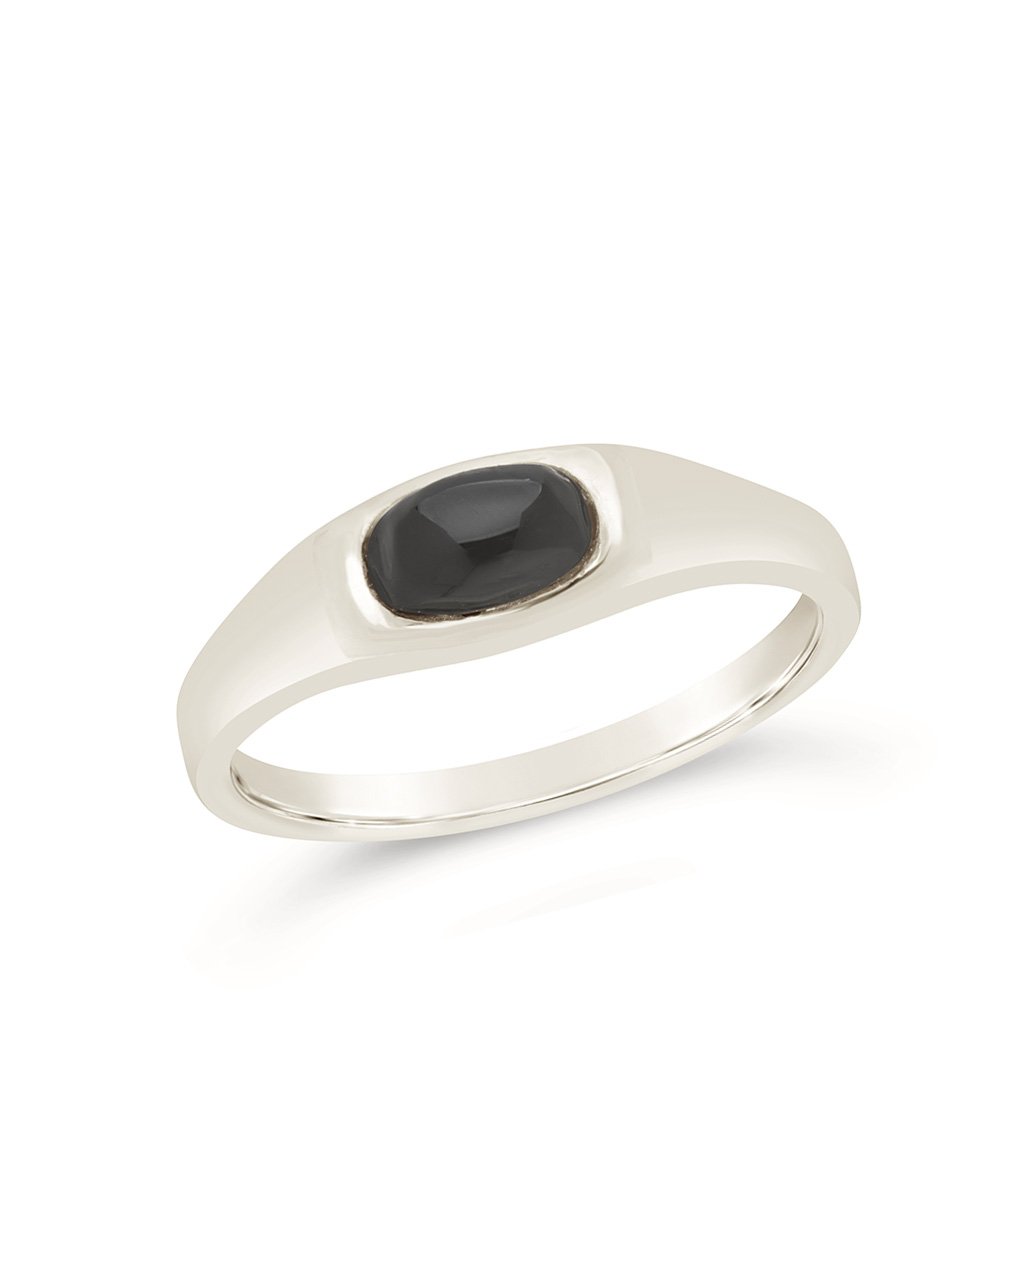 Sterling silver, black onyx and diamond ring